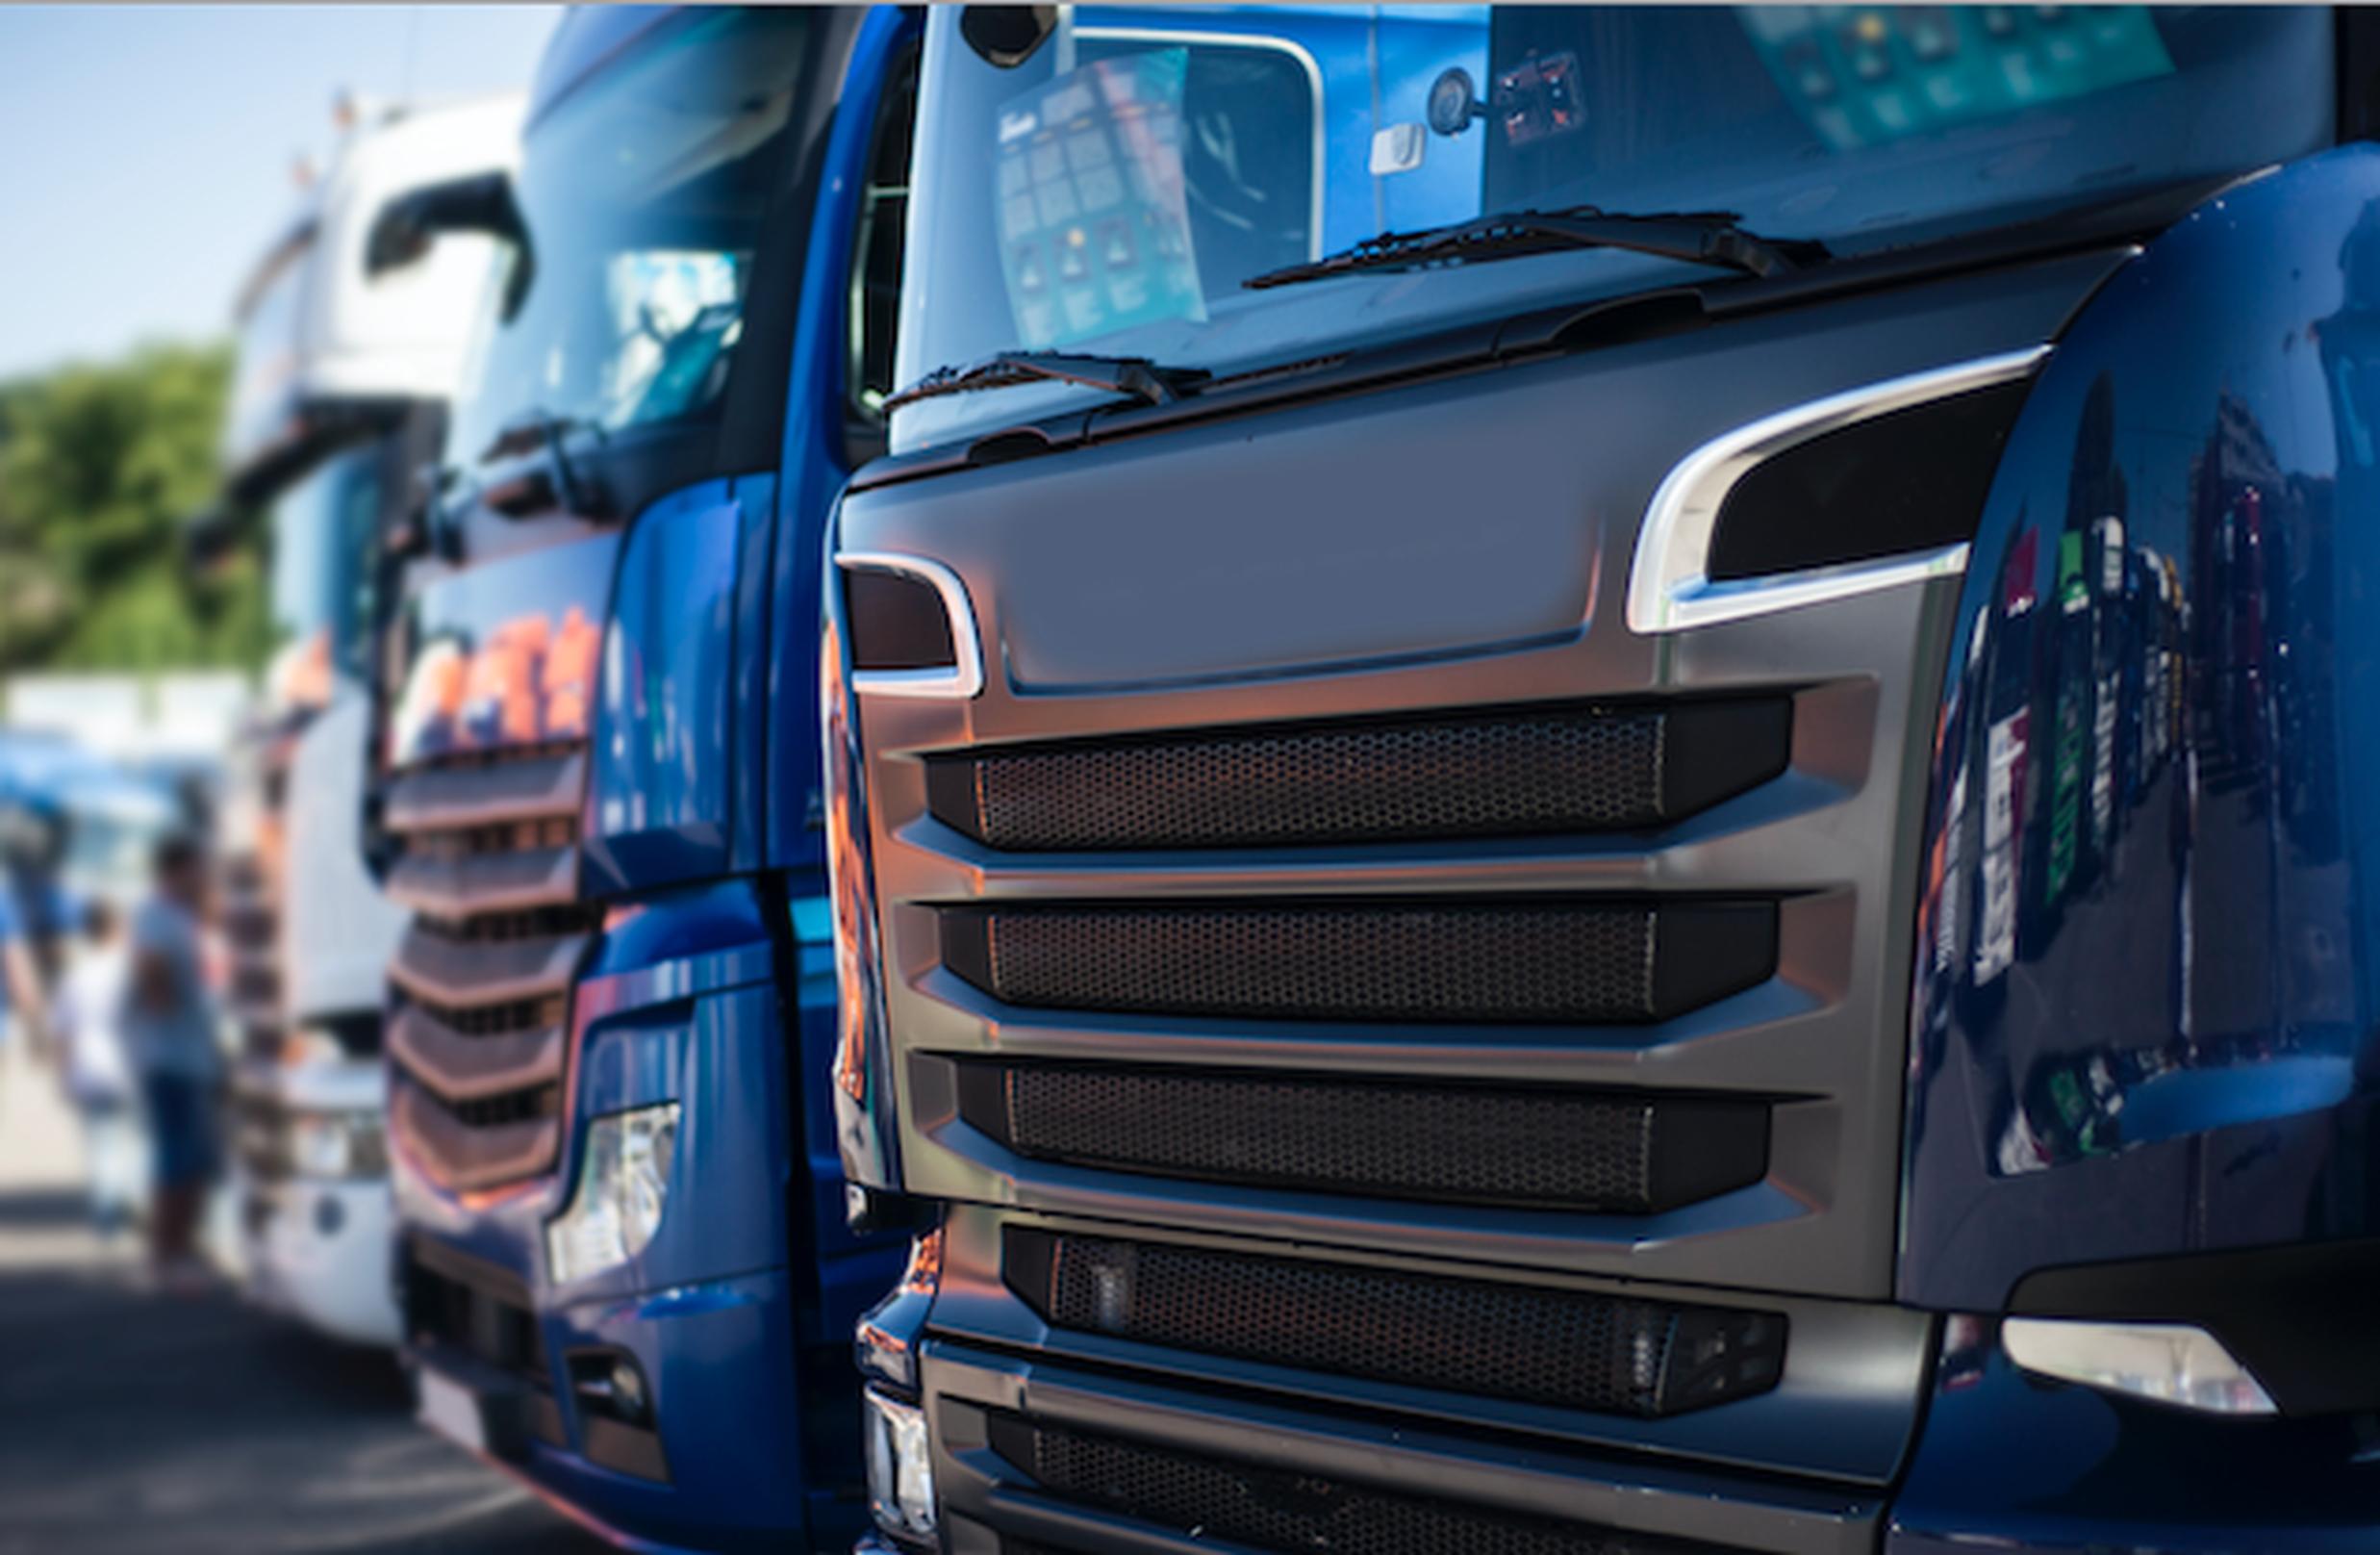 TAPA’s solution is outlined in its new Position Paper on Support for Truck Parking in European Union Member States.